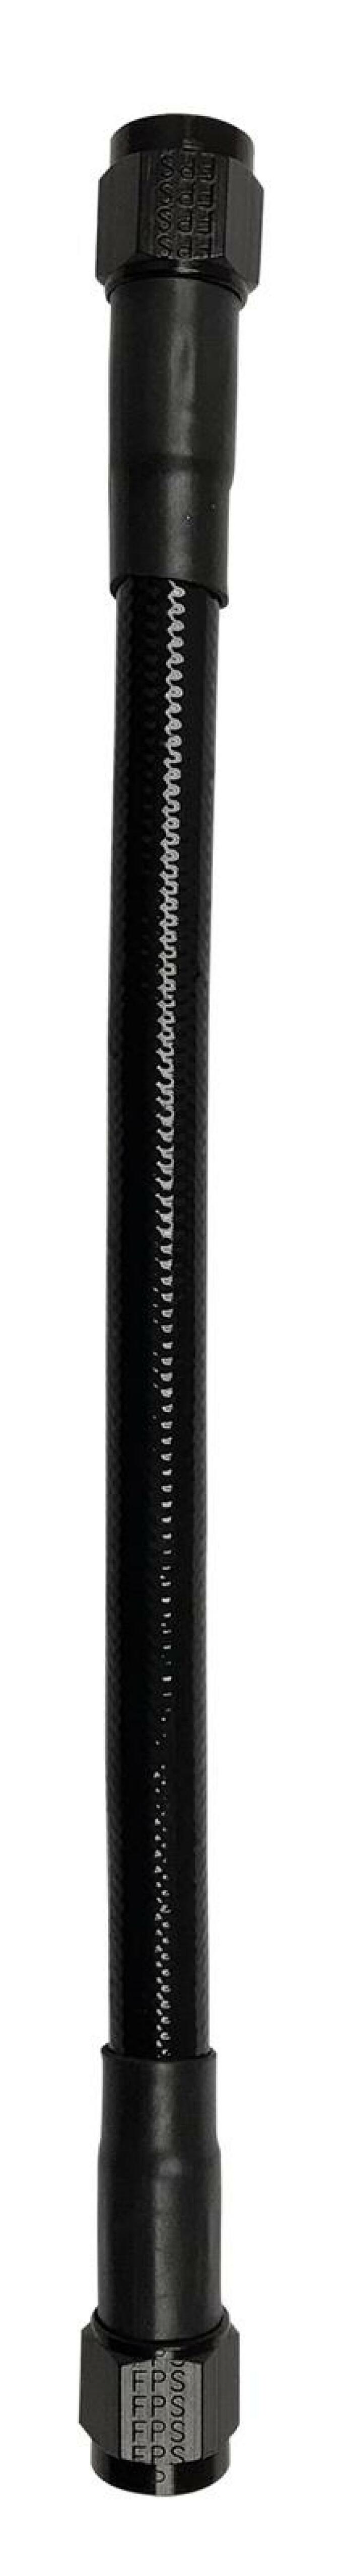 Fragola -10AN Ext Black PTFE Hose Assembly Straight x Straight 84in - 6029-1-1-84BL